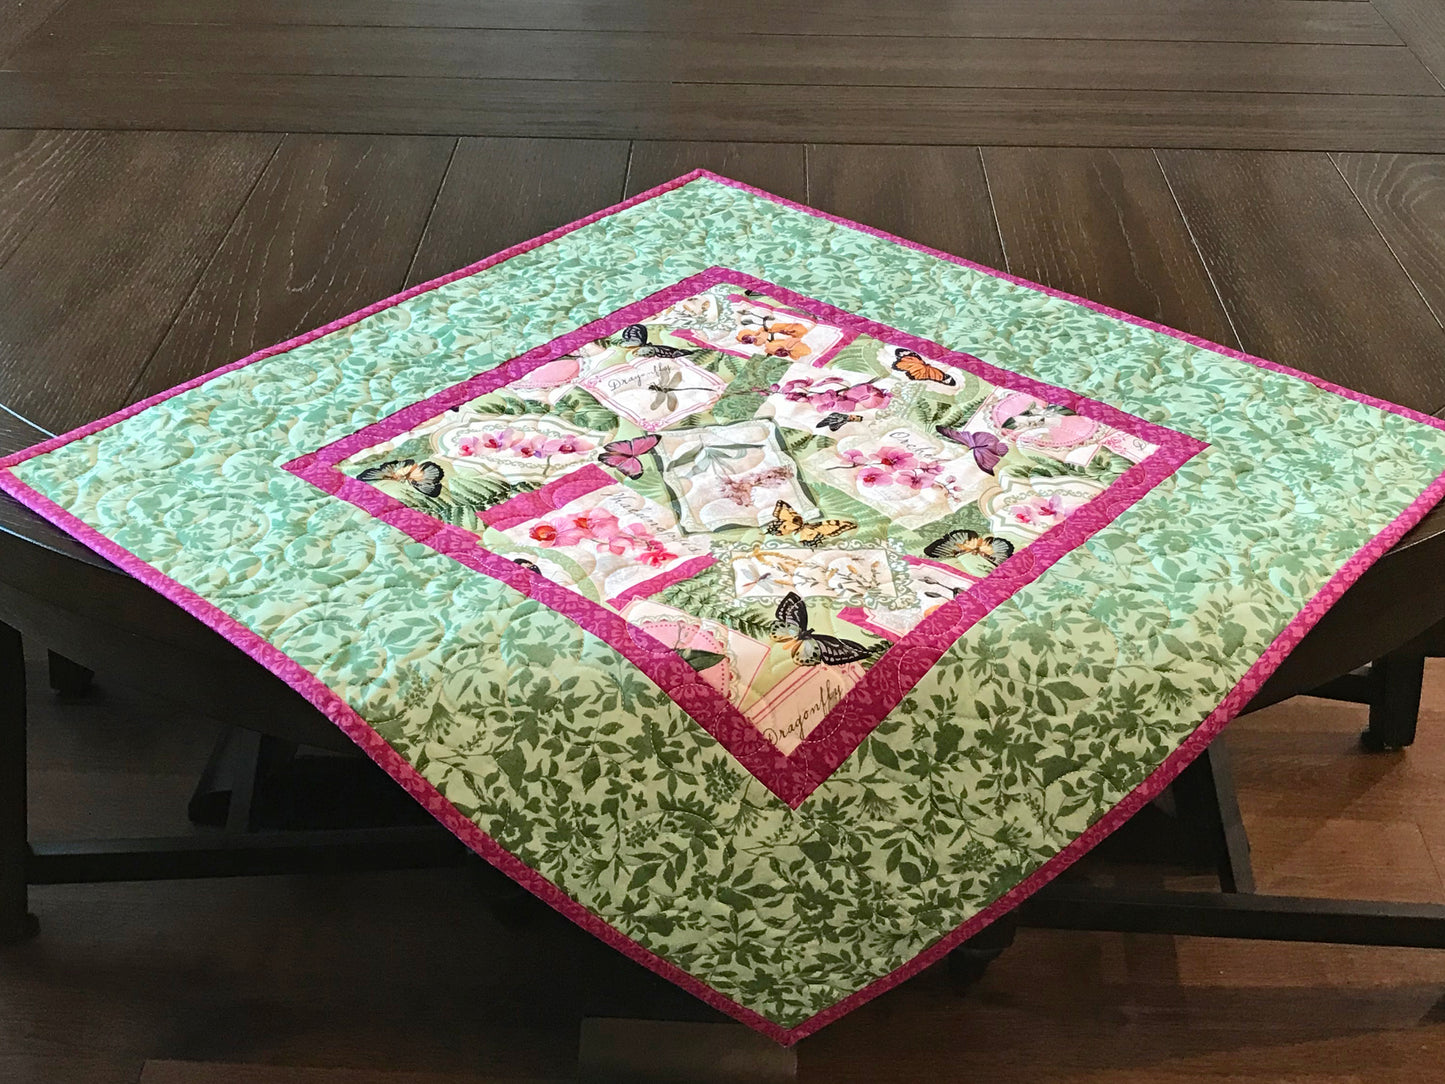 Butterfly Floral Table Topper - Handmade Quilts, Digital Patterns, and Home Décor items online - Cuddle Cat Quiltworks